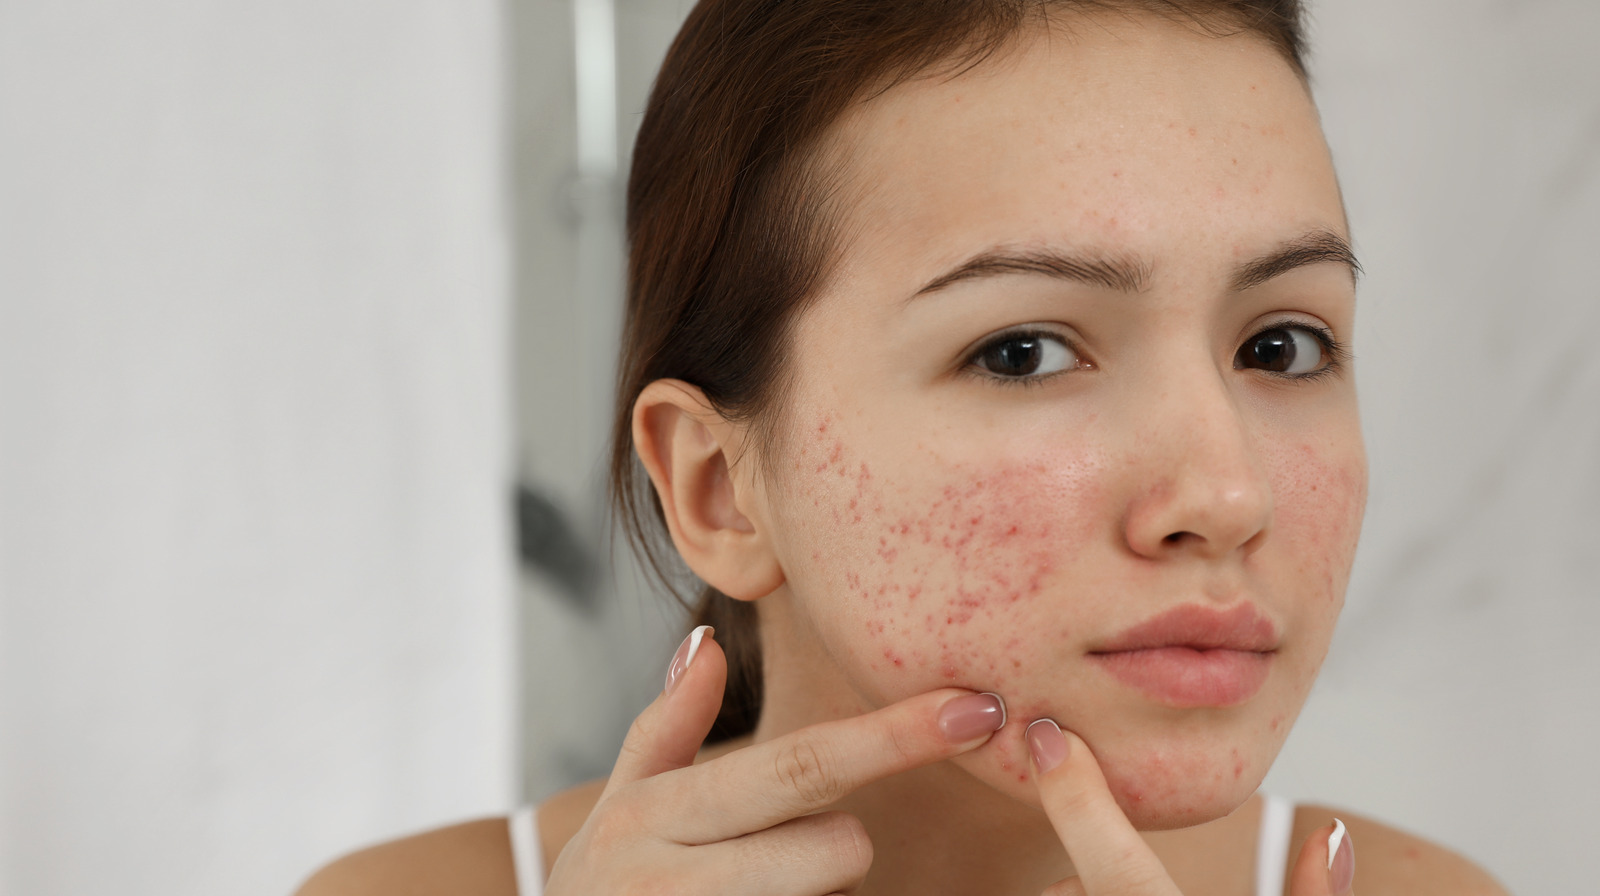 How To Tell If You Have Acne